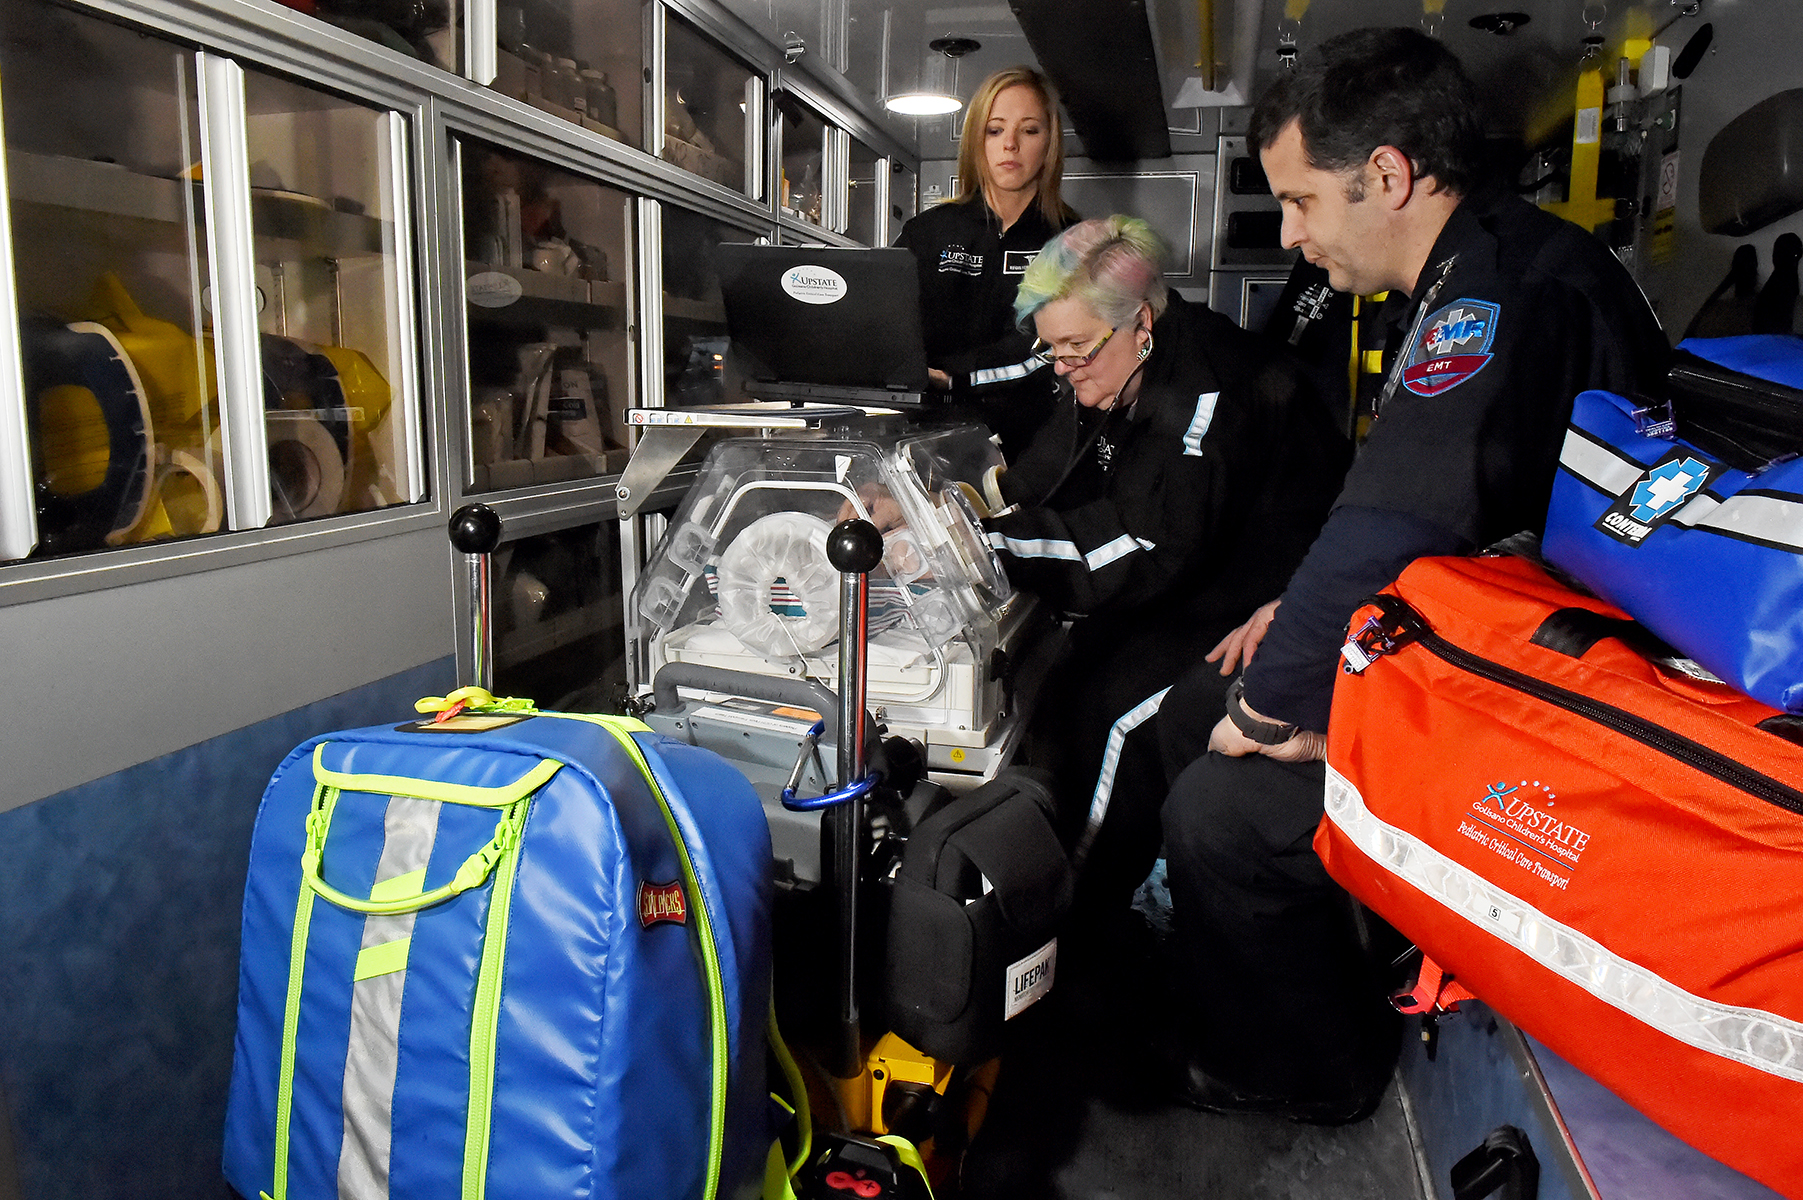 Nurses Arlinda Carey and Melanie Charleston prep an incubator in the back of an ambulance at Upstate University Hospital‘s downtown emergency department. They are members of Upstate‘s pediatric critical care transport team who offer intensive care to critically ill children at other hospitals from the Canadian to the Pennsylvania borders. They are pictured with emergency medical technician Marc Battaglia, right. (PHOTO BY JOHN BERRY)